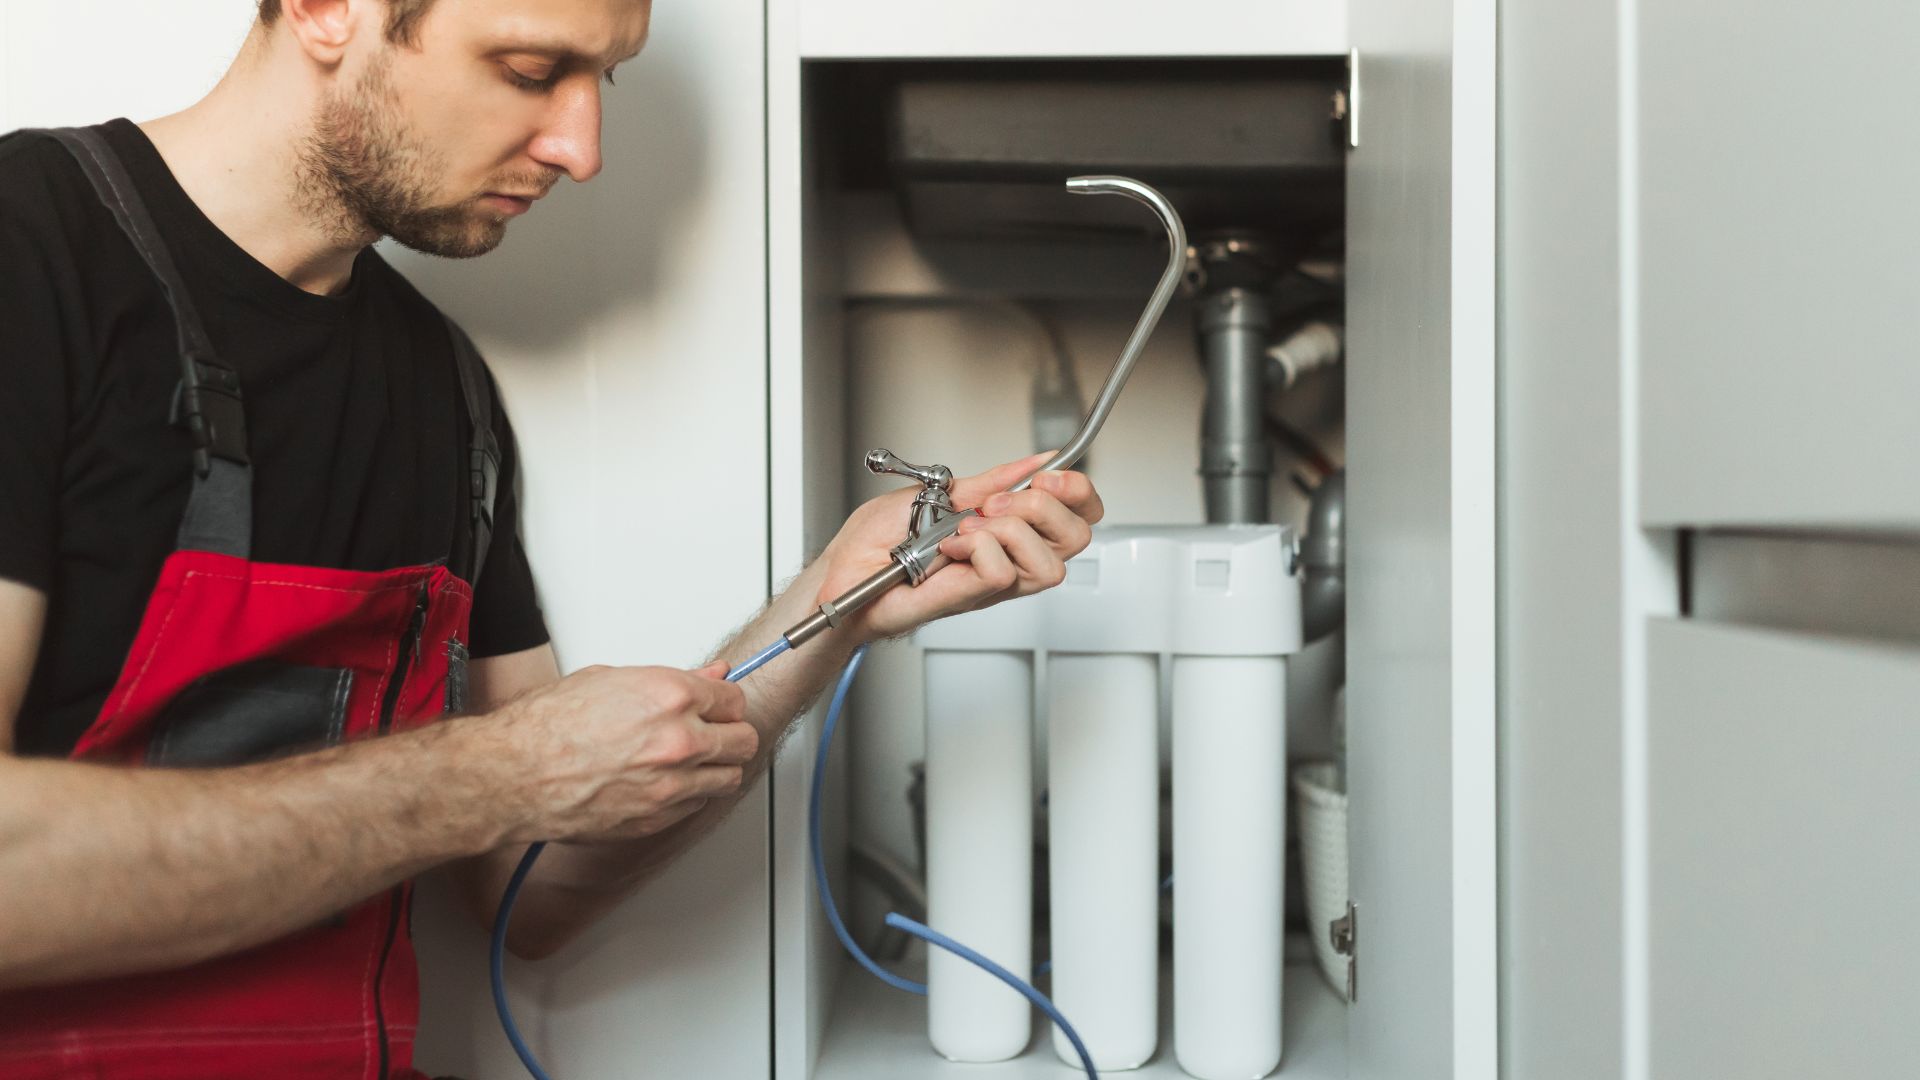 Get in touch with CAN Plumbing and Drainage today for your complete water filtration requirements, handled expertly by our experienced plumbers.